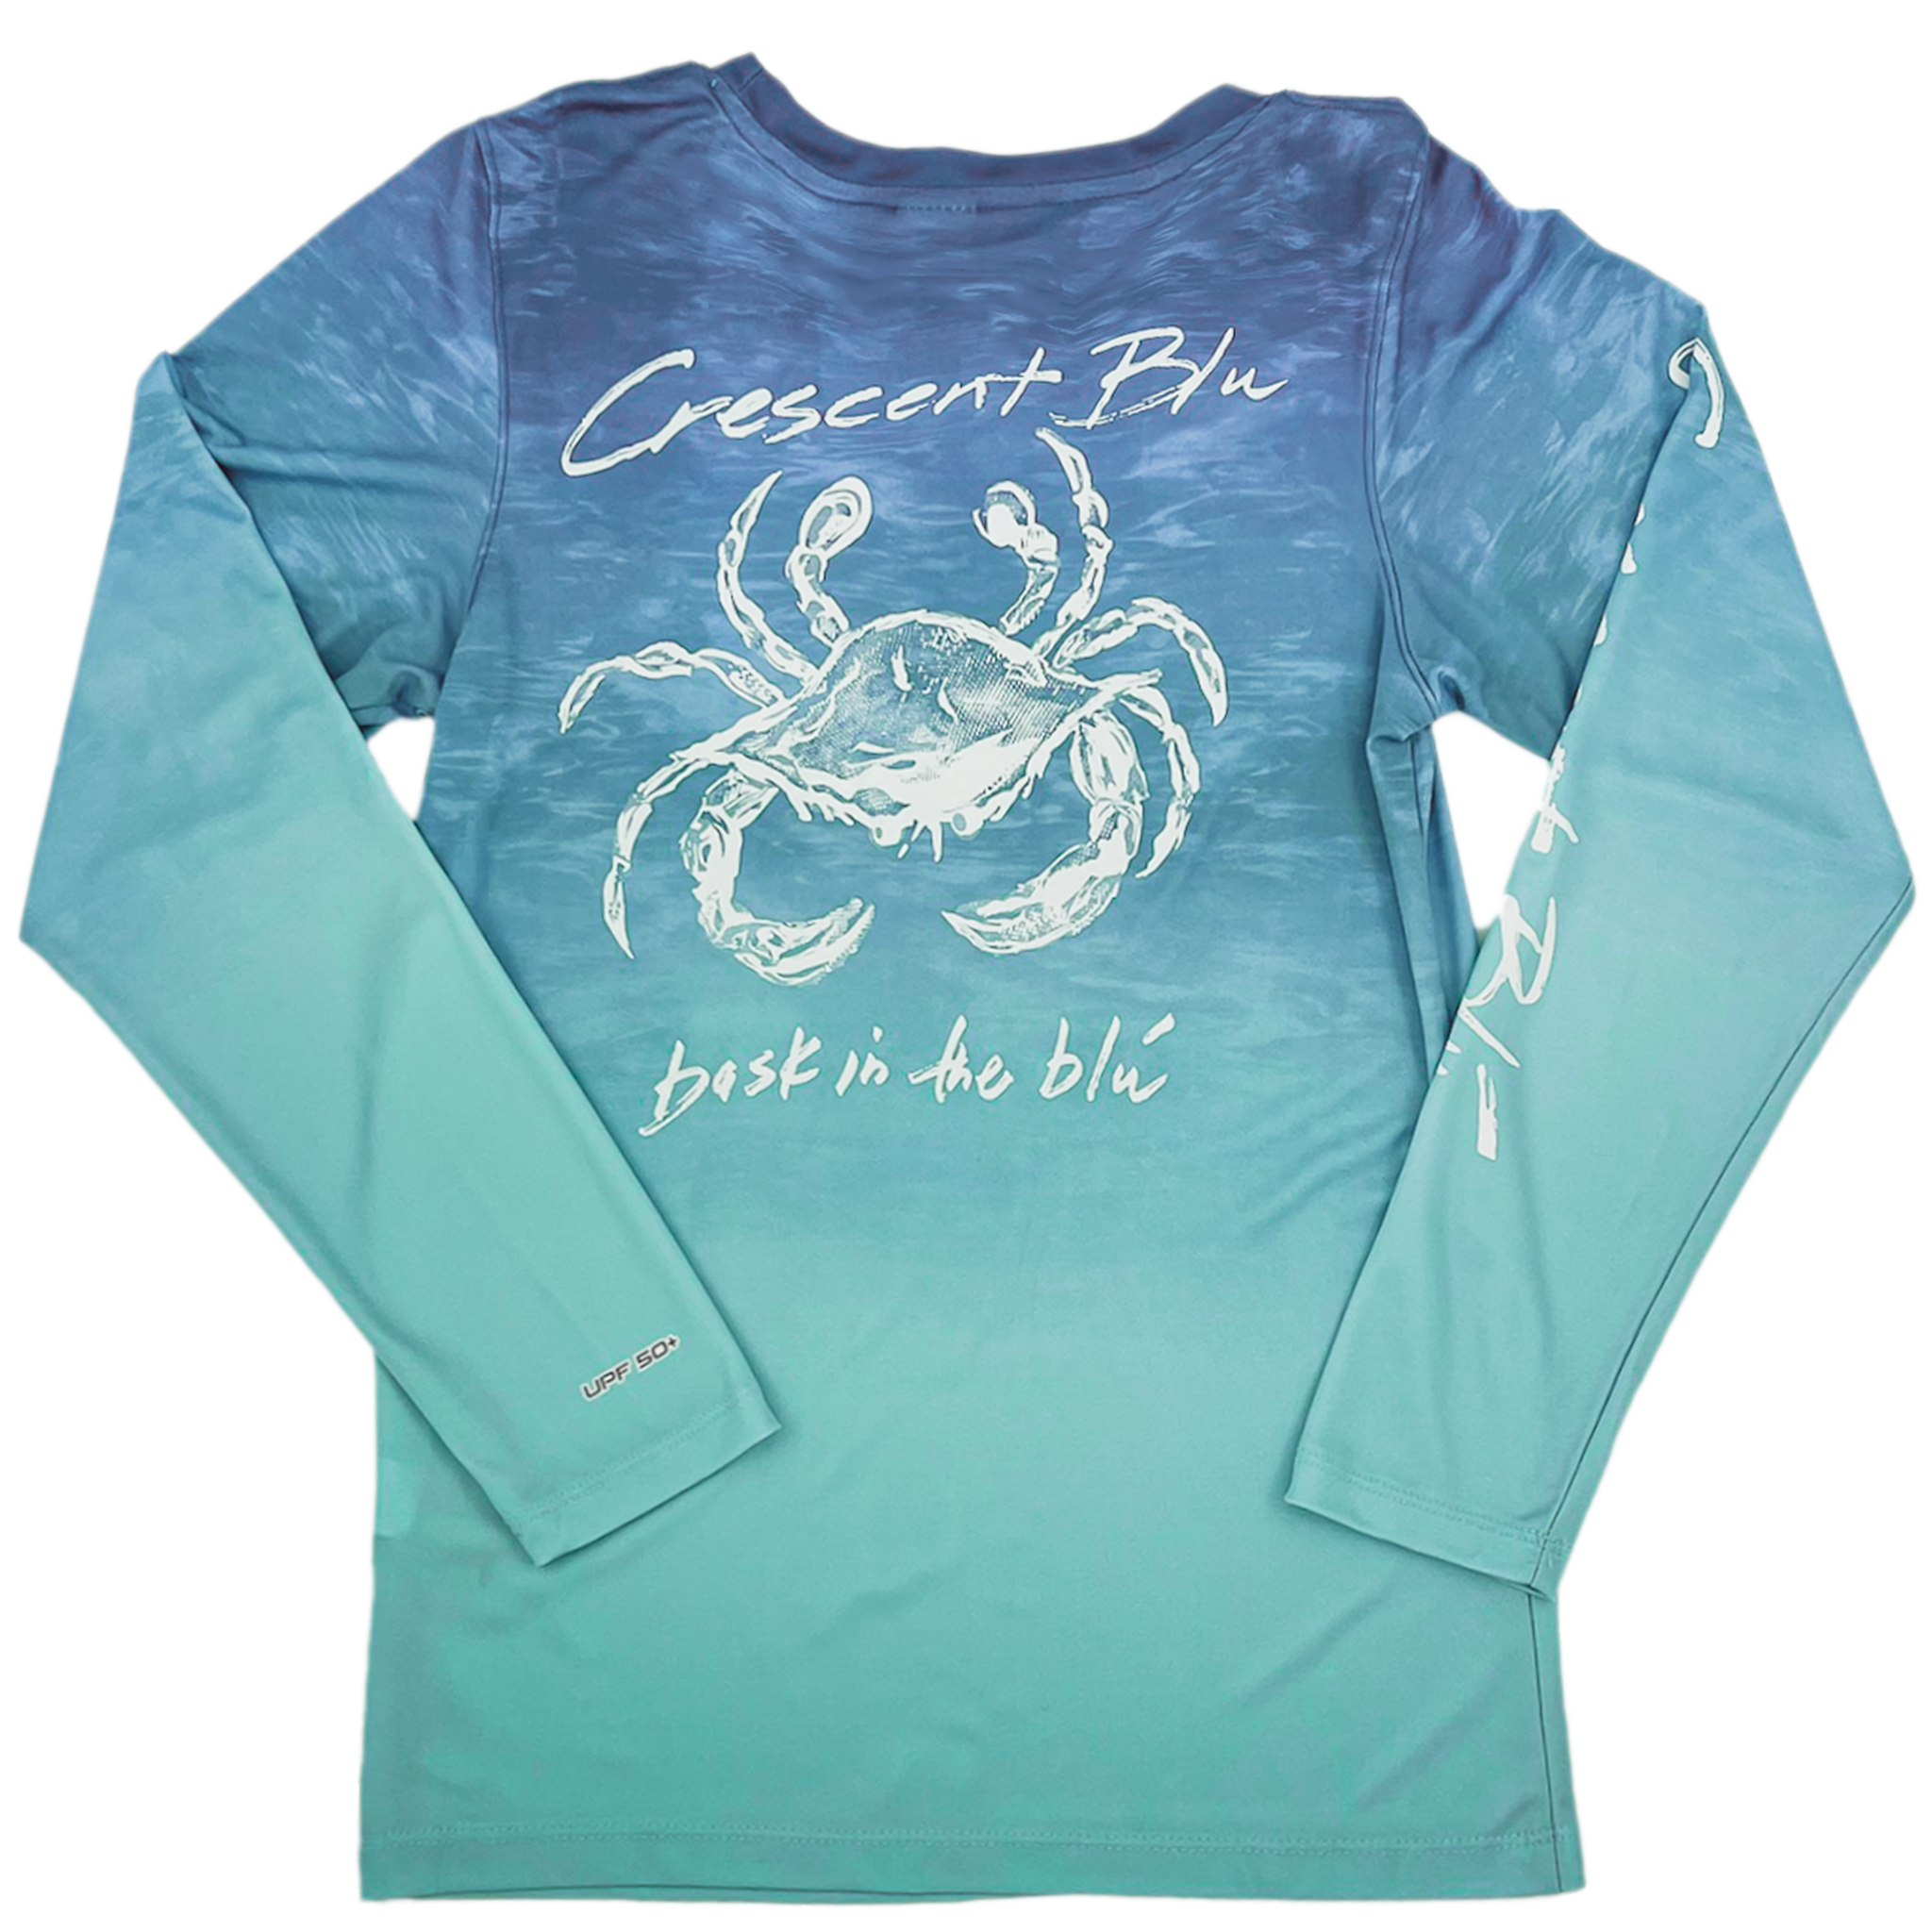 A long sleeve shirt that fades from blue to aqua and has a white crab center on the back.